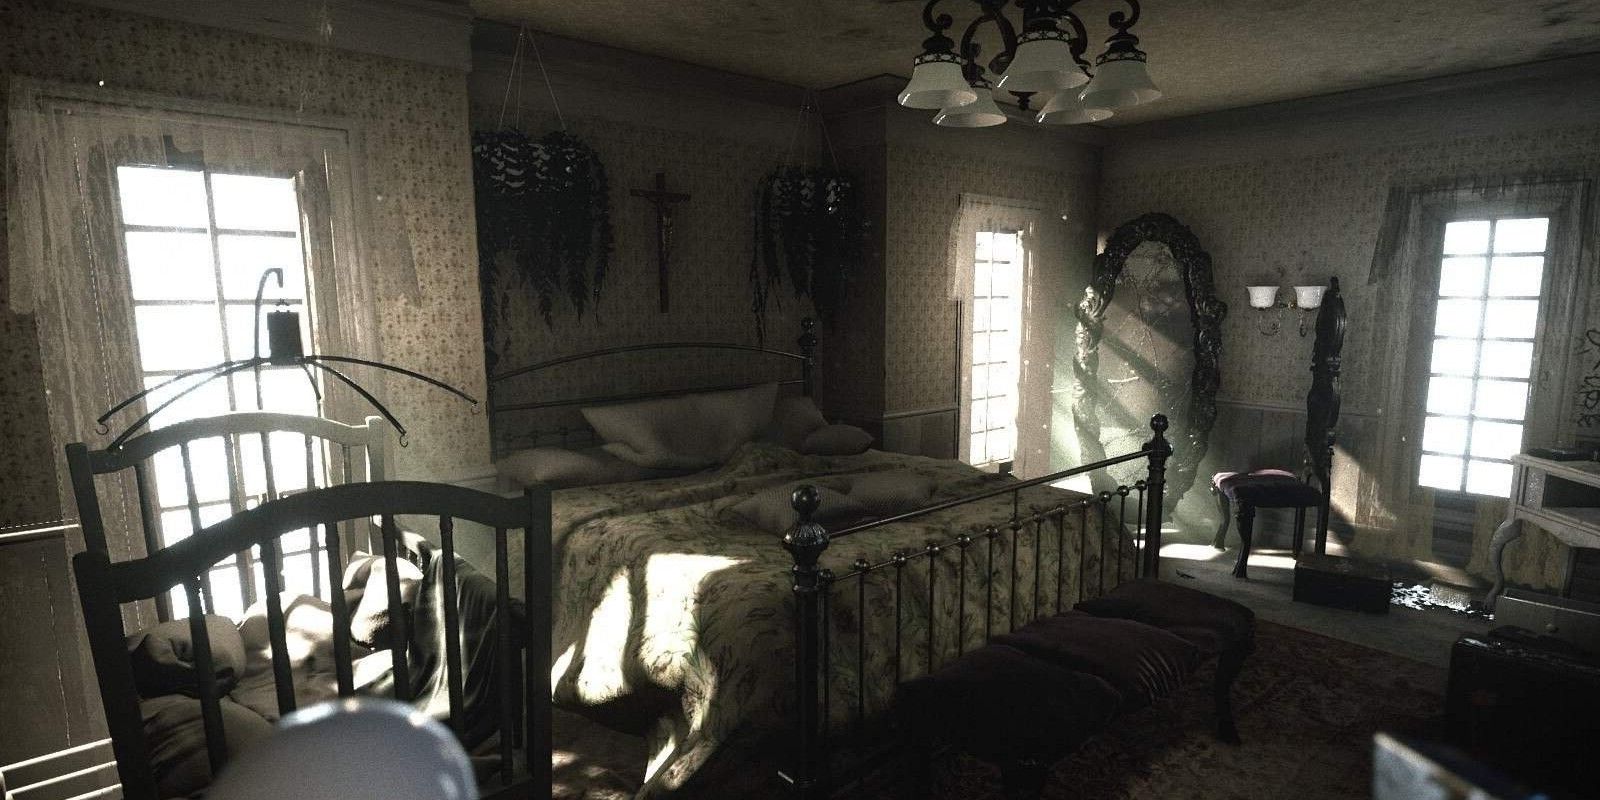 The Parents' Bedroom during chapter 2 of Visage